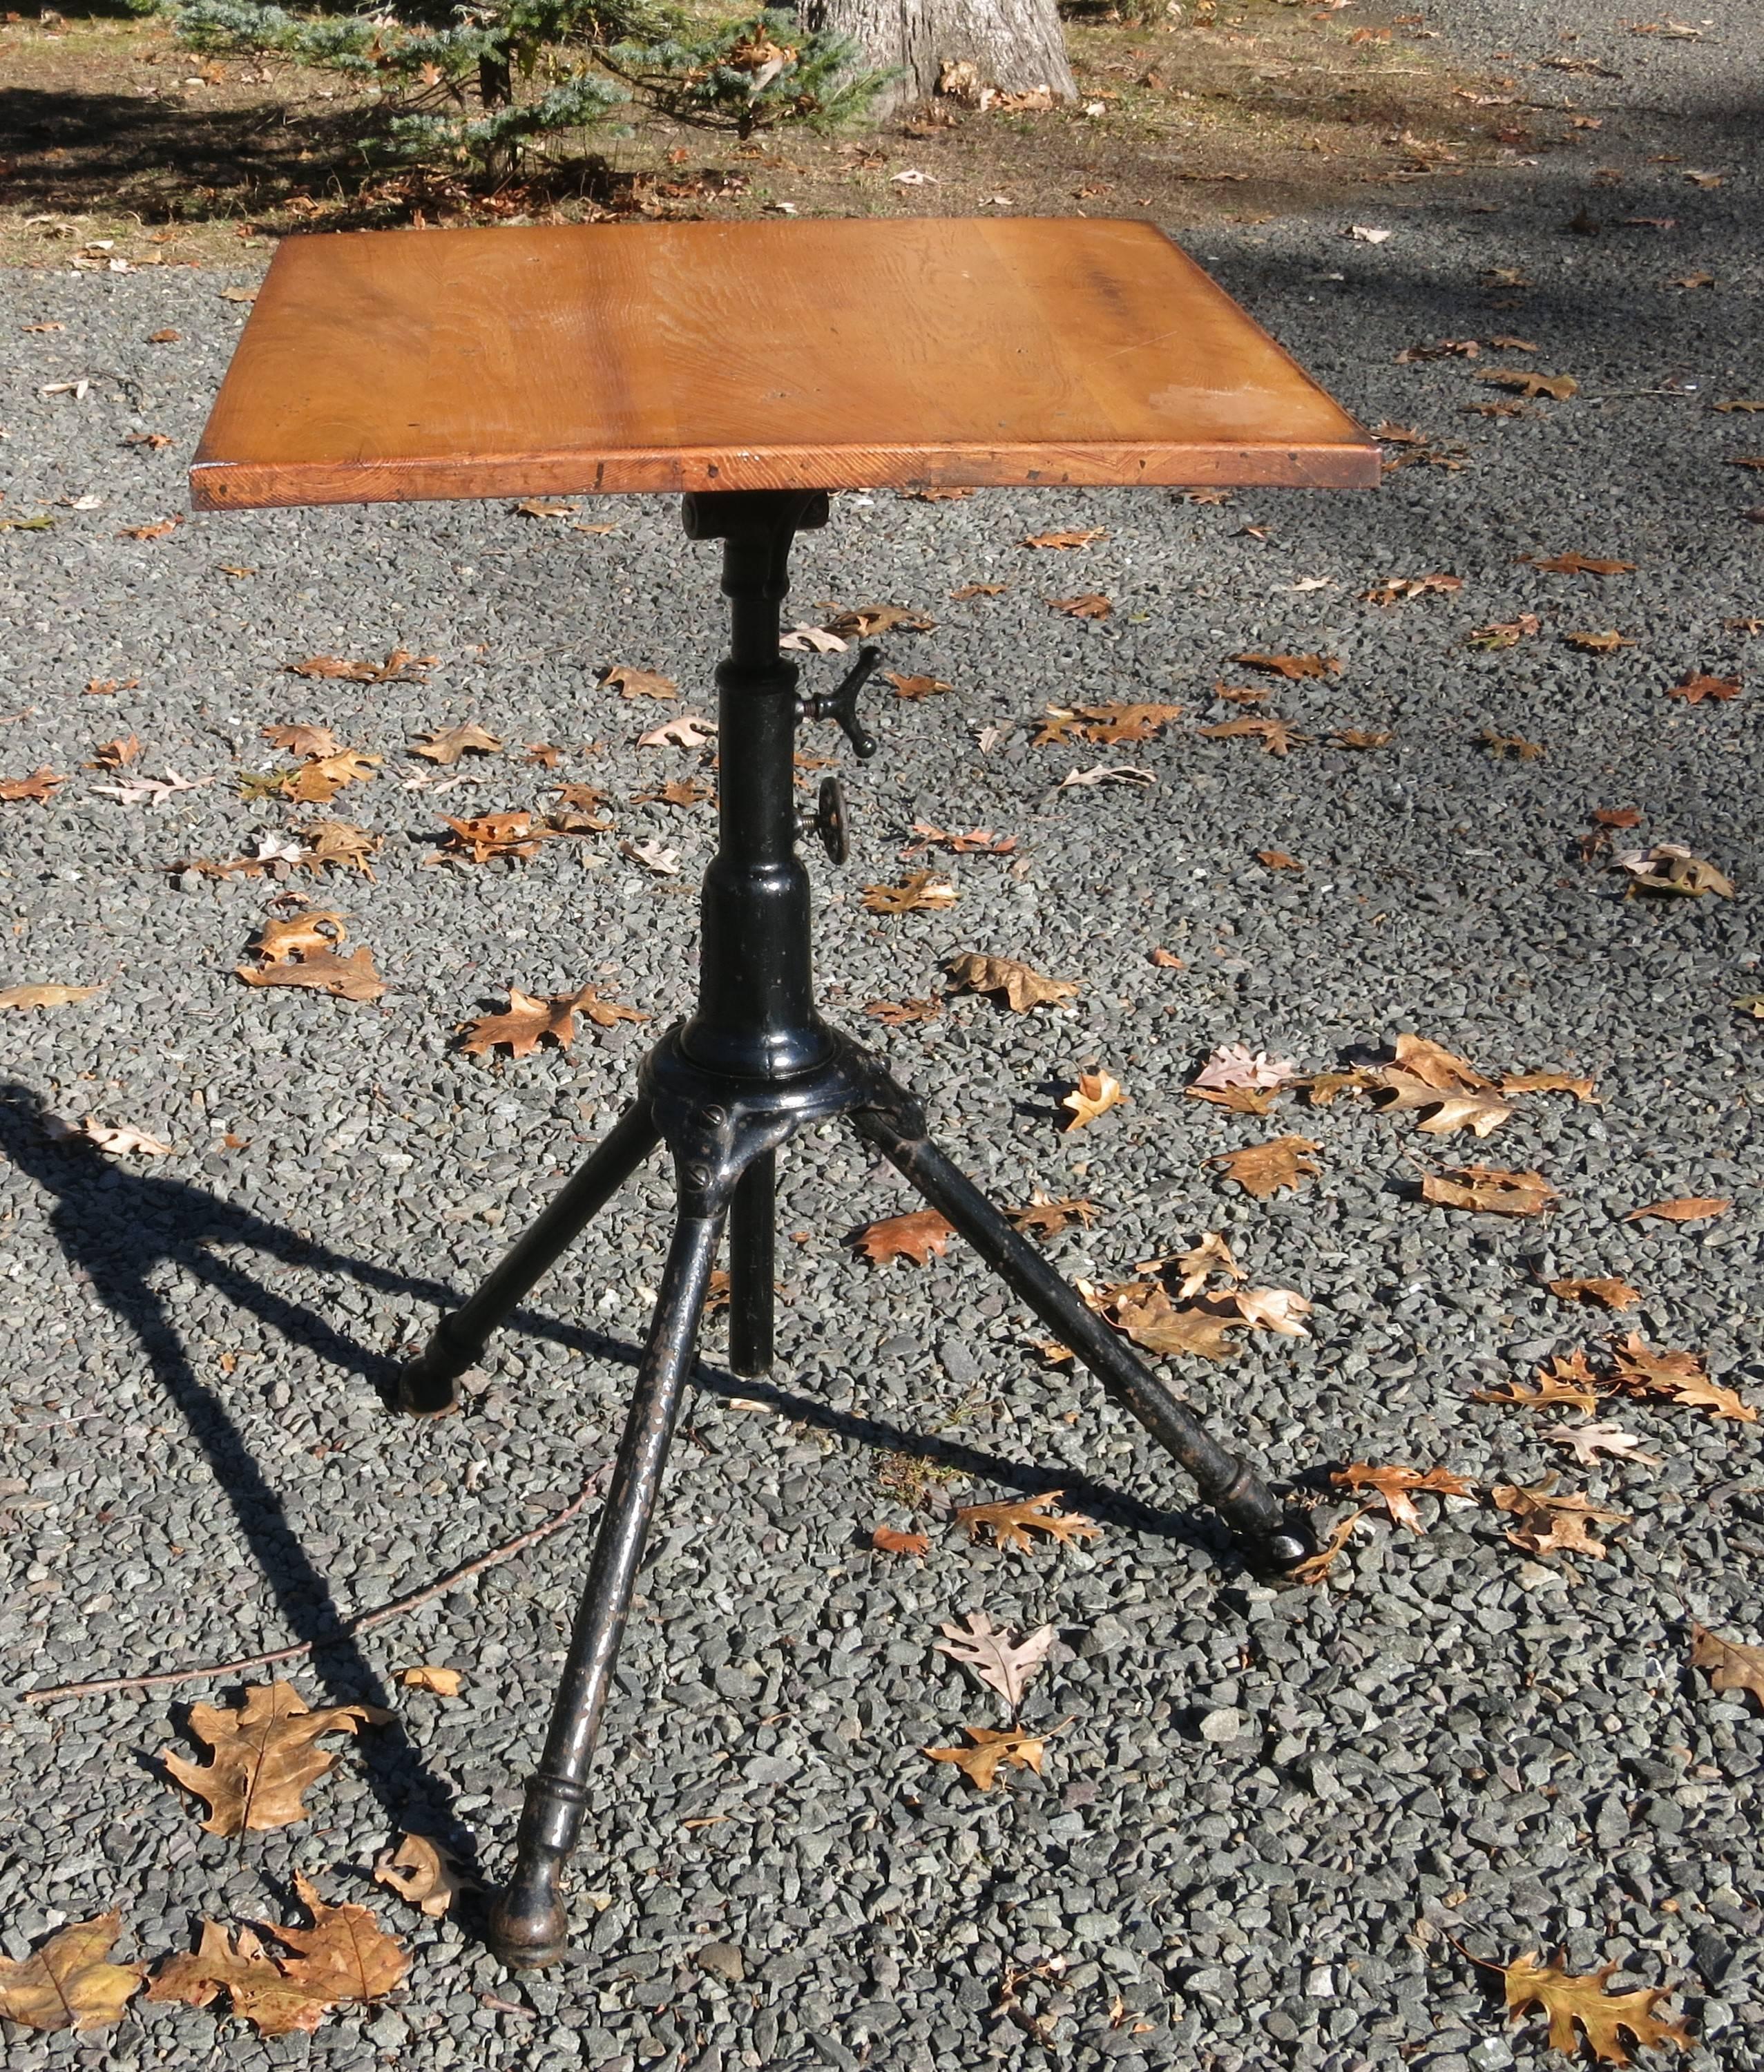 Great 1910 adjustable table by A. Hoffman Rochester NY. The top is 24